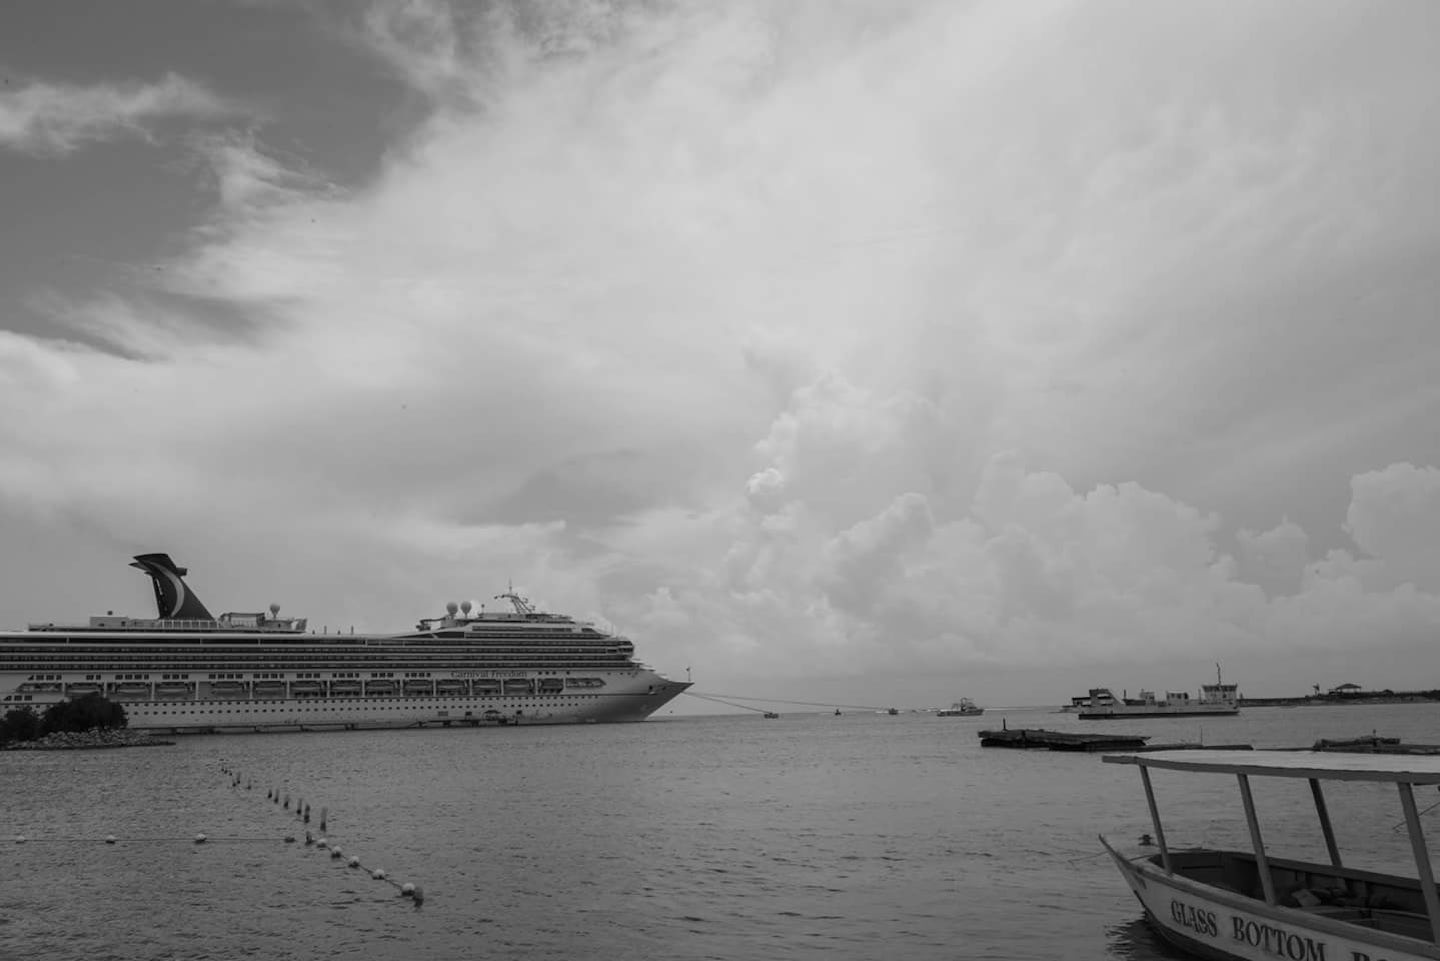 Carnival Freedom docked at Ocho Rios. I was sitting on the beach watching the clouds looming in the background. Shot with Nikon D800 with 24-70 f/2.8